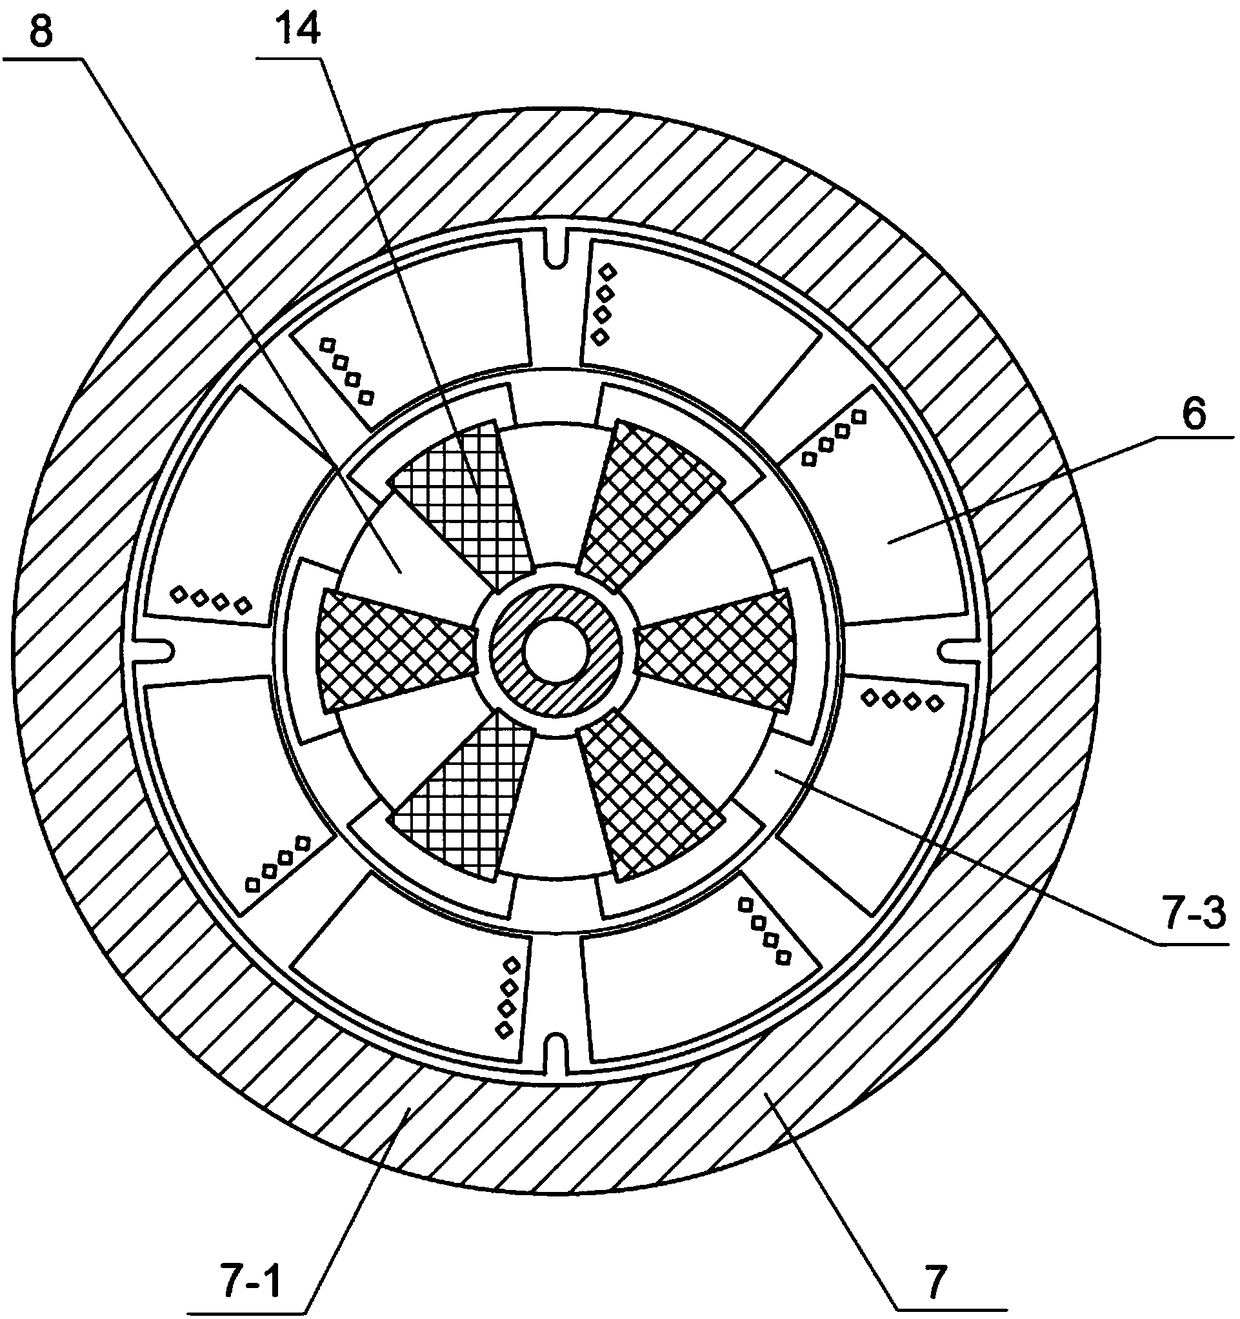 Ultrahigh-speed disc type permanent magnet synchronous motor